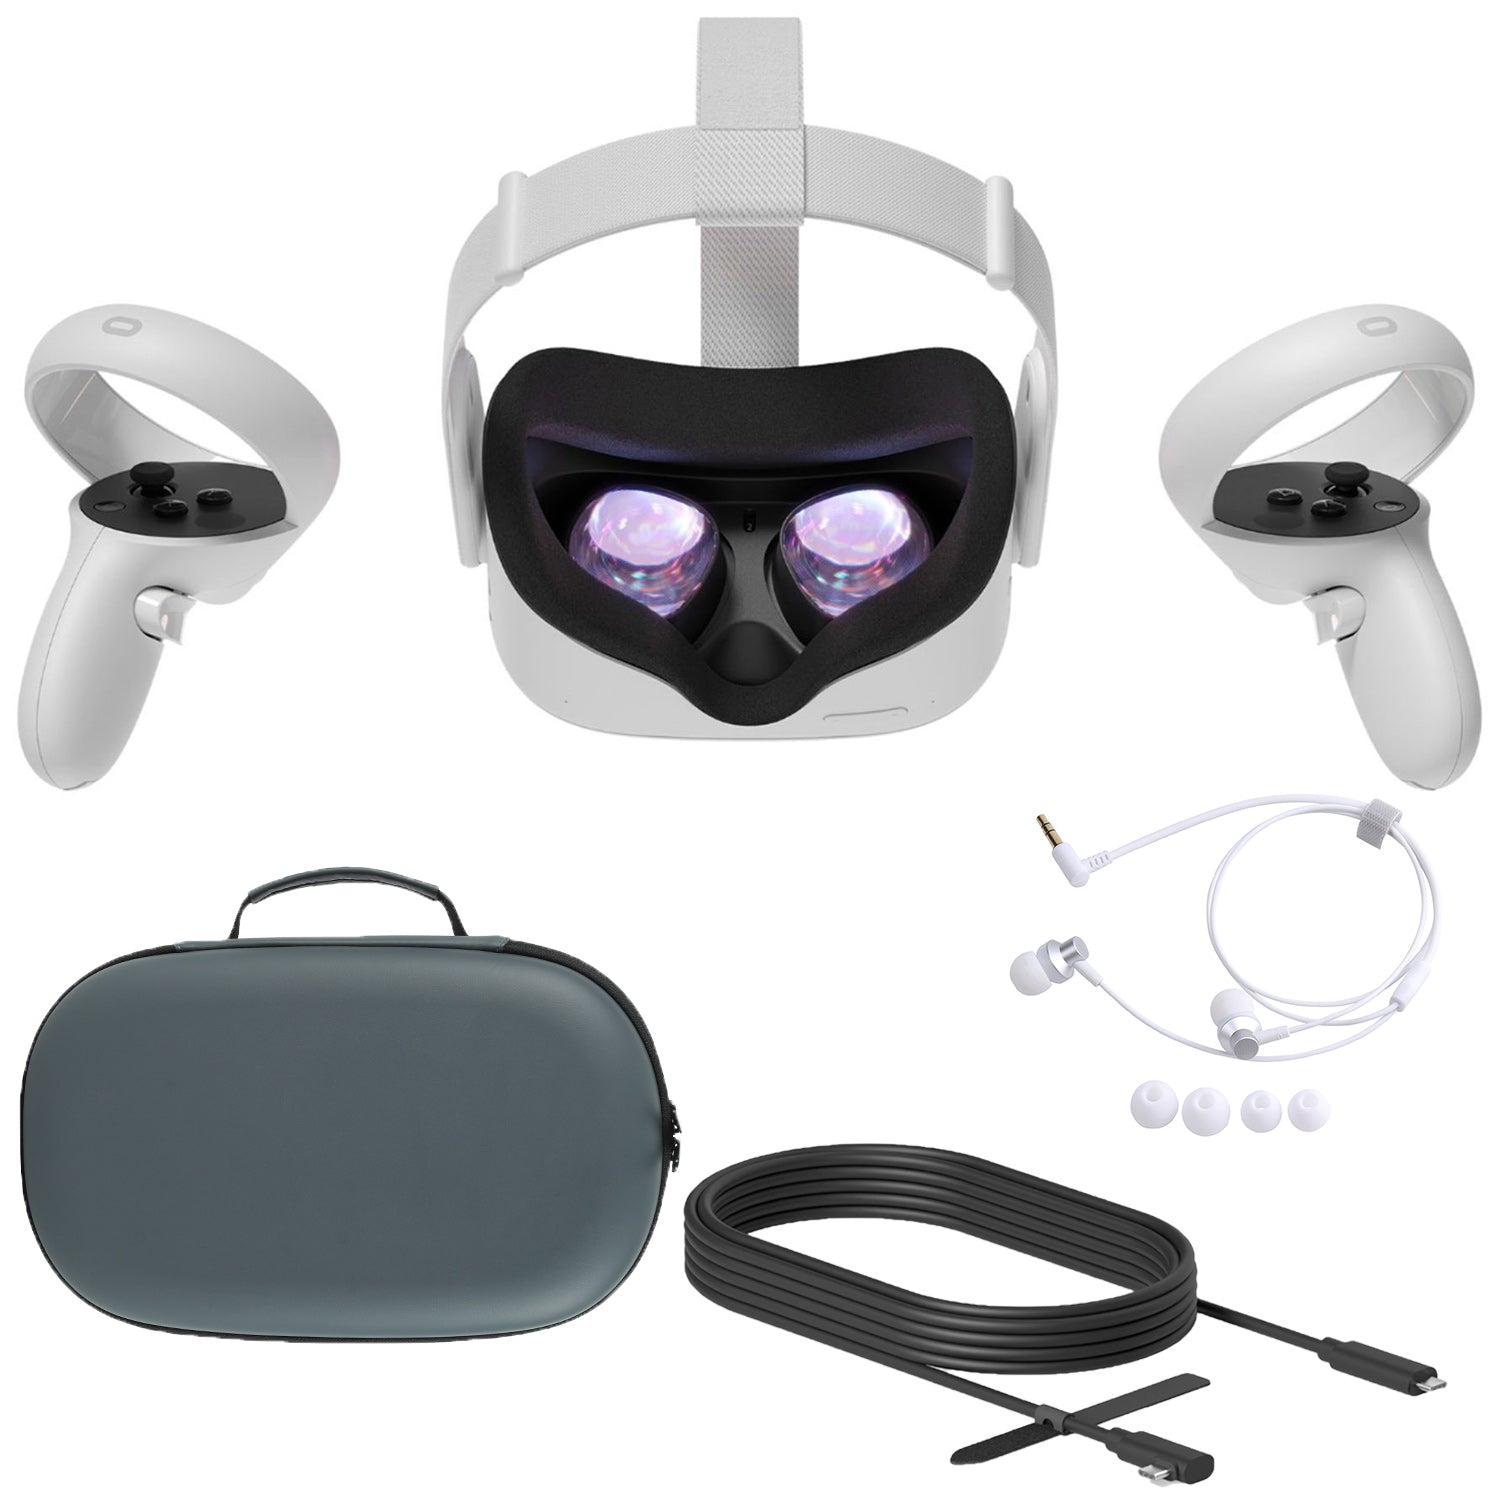 2020 Oculus Quest 2 All-In-One VR Headset, Touch Controllers, 128GB SSD, 1832x1920 up to 90 Hz Refresh Rate LCD, Glasses Compatible, 3D Audio, Mytrix Carrying Case, Earphone, Oculus Link Cable (3M)